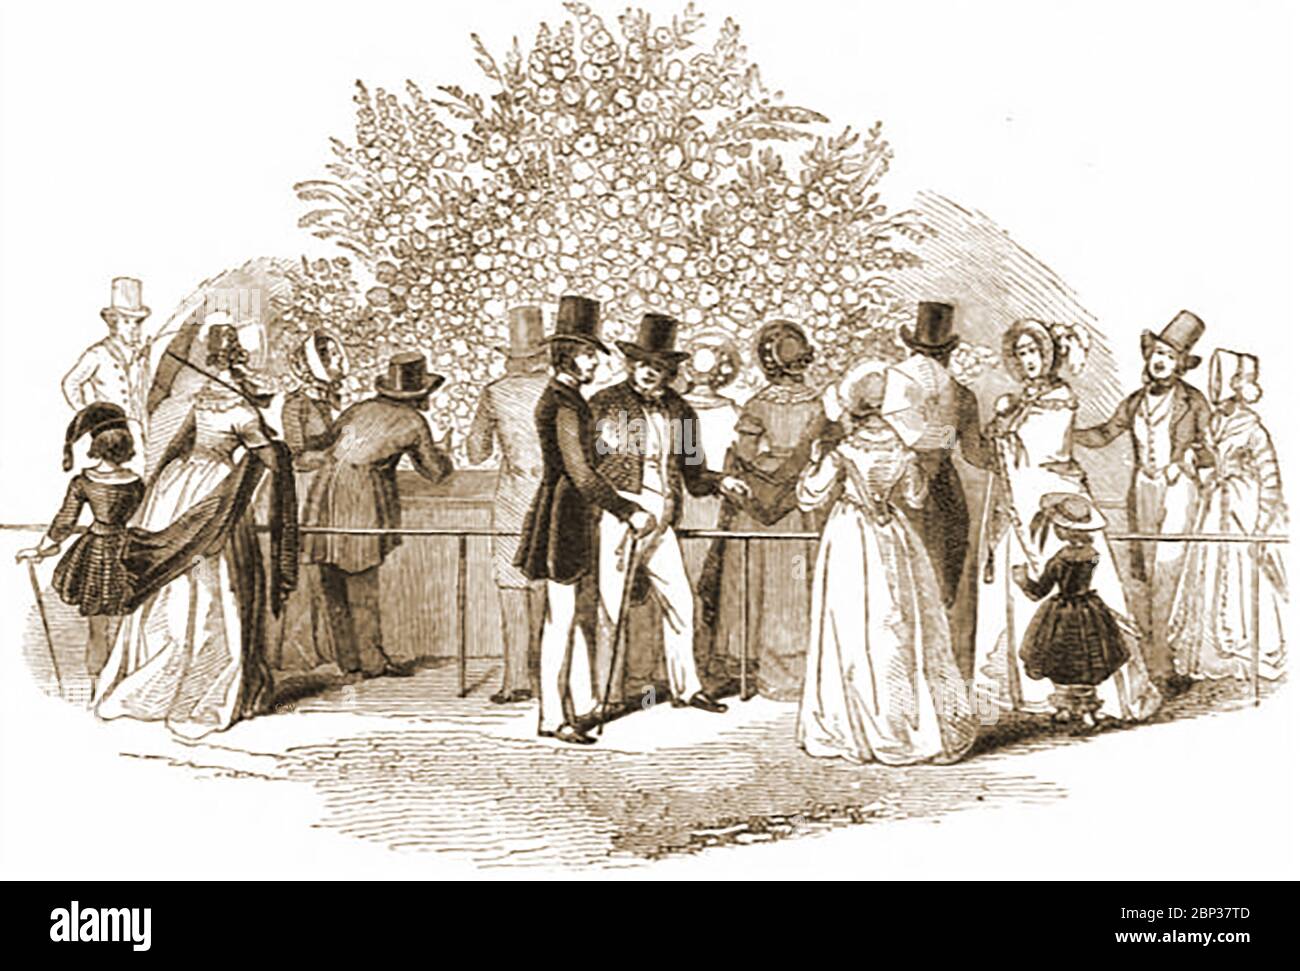 South London Flower Show 1842 held at the Surrey Zoological Gardens - Now Pasley Park  housing estate site (from an English  publication of the time). Royal Surrey Gardens was a pleasure gardens containing at separate times,  a music hall and a zoo. It was in the grounds of Surrey Manor House (Manor Place, close to Pasley Park).  The Surrey Zoological Gardens were opened in 1831 by Edward Cross who already had a menagerie on the Strand.  It also hosted flower shows & special fete days with historical re-enactments, including the Great Fire of London and the eruption of Mount Vesuvius. Stock Photo